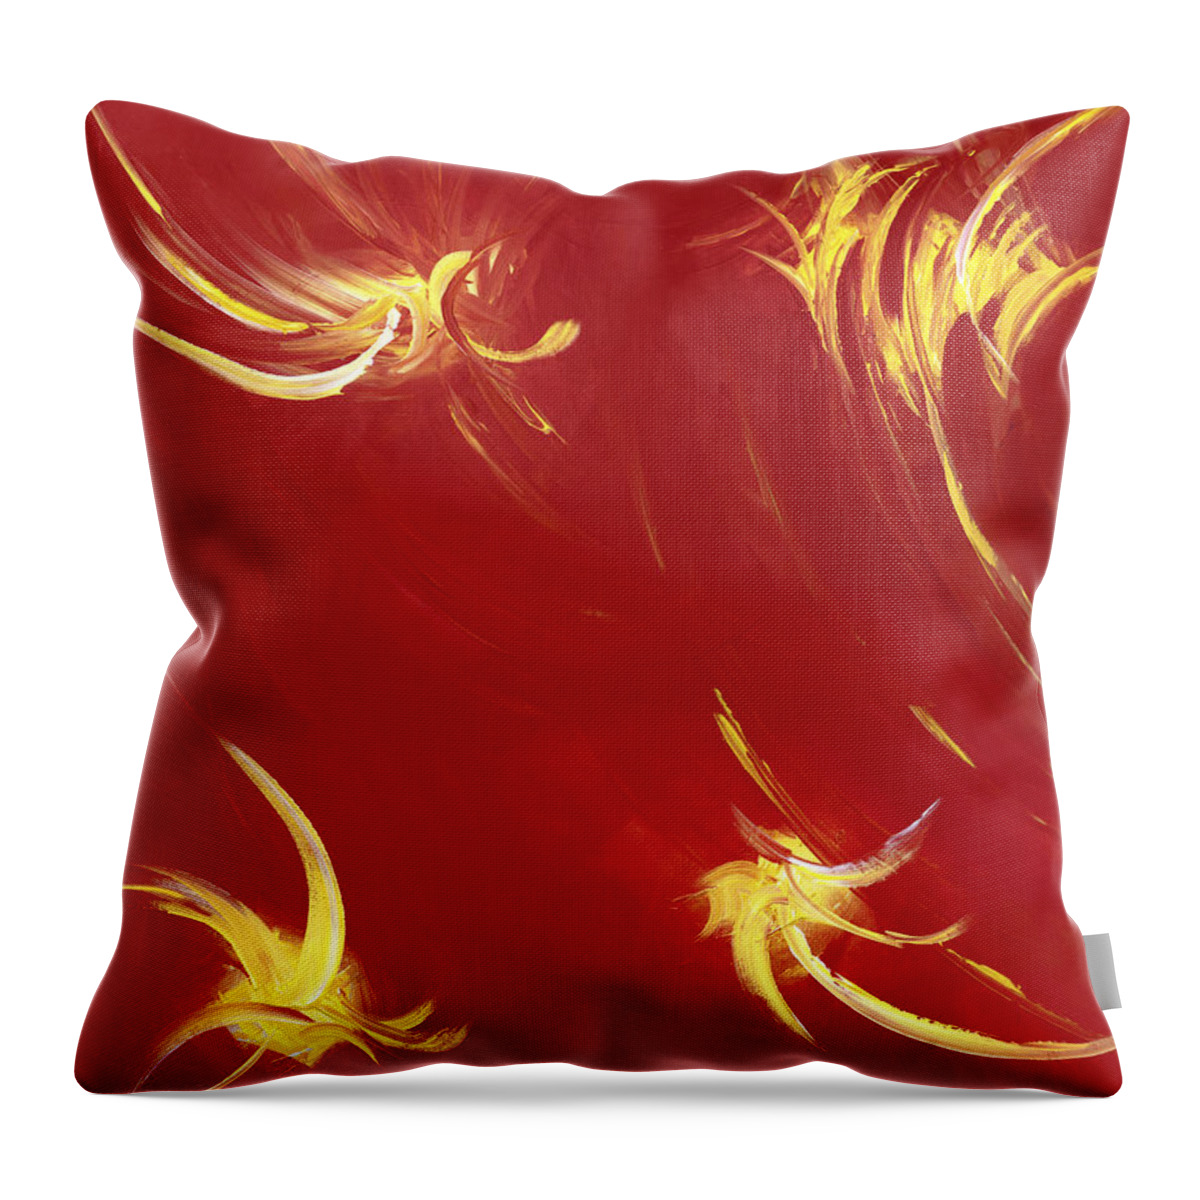 Abstract Throw Pillow featuring the painting Fireworks by Tamara Nelson